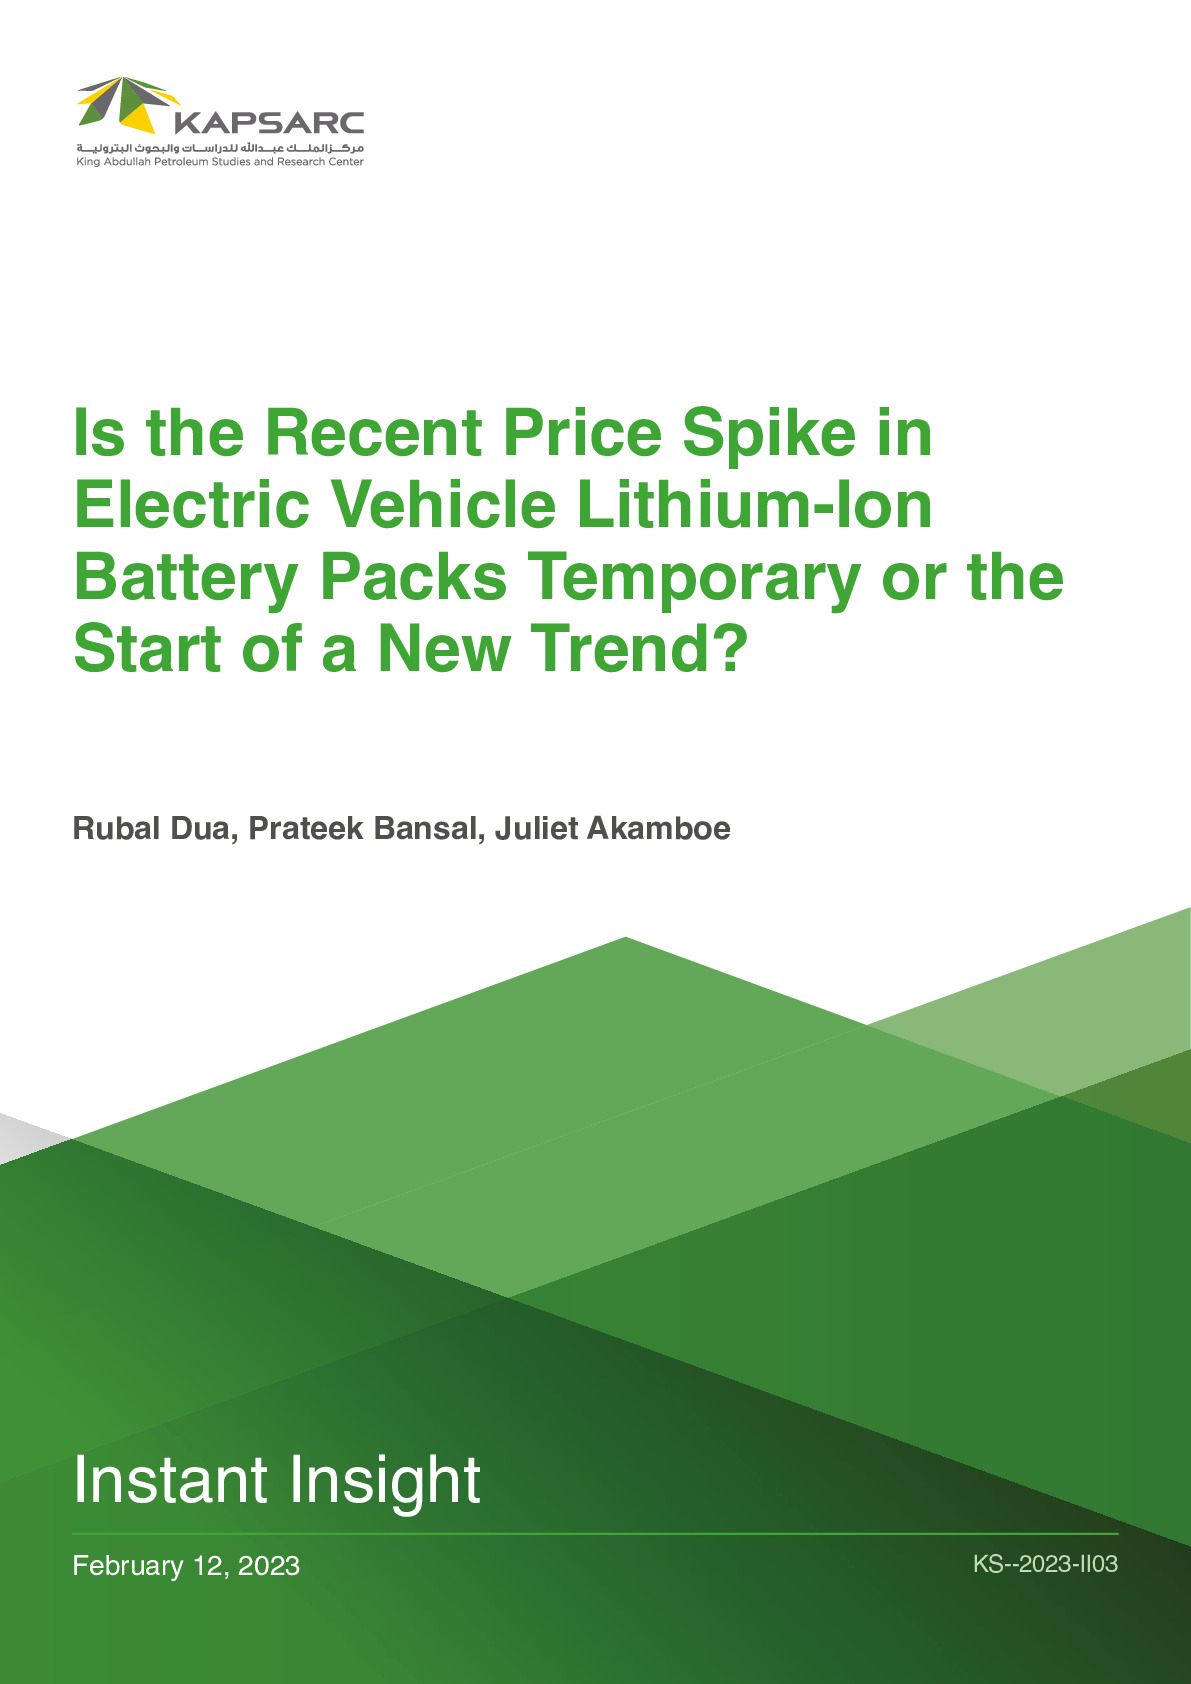 Is the Recent Price Spike in Electric Vehicle Lithium-Ion Battery Packs Temporary or the Start of a New Trend?